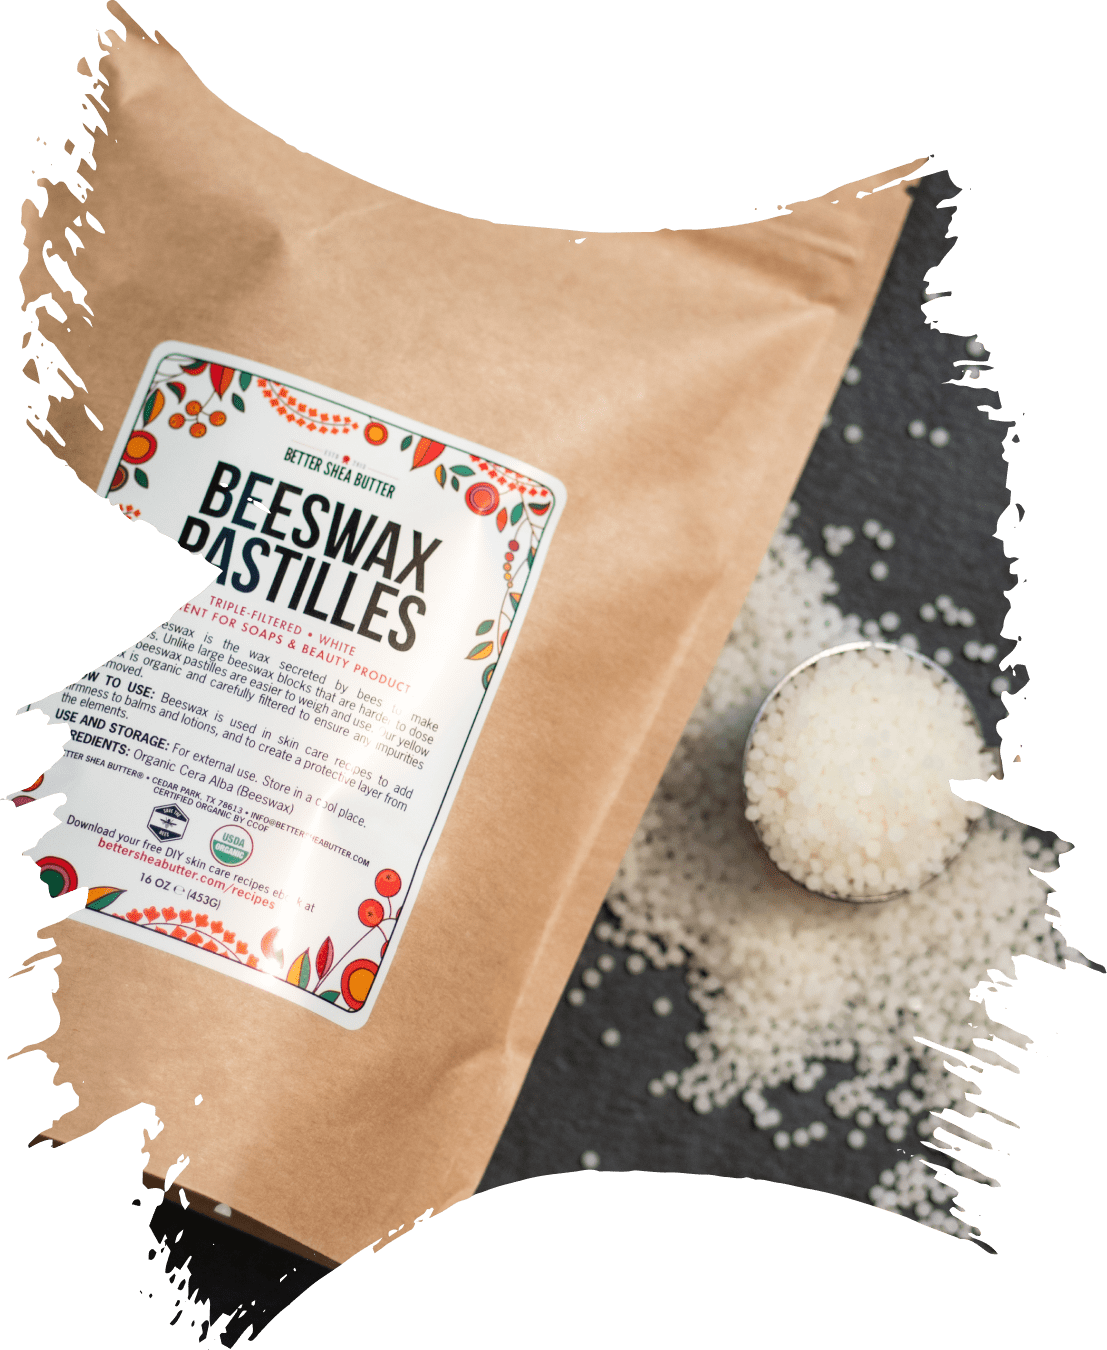 White 100% Beeswax Pastilles Product of USA – Bulk Naturals